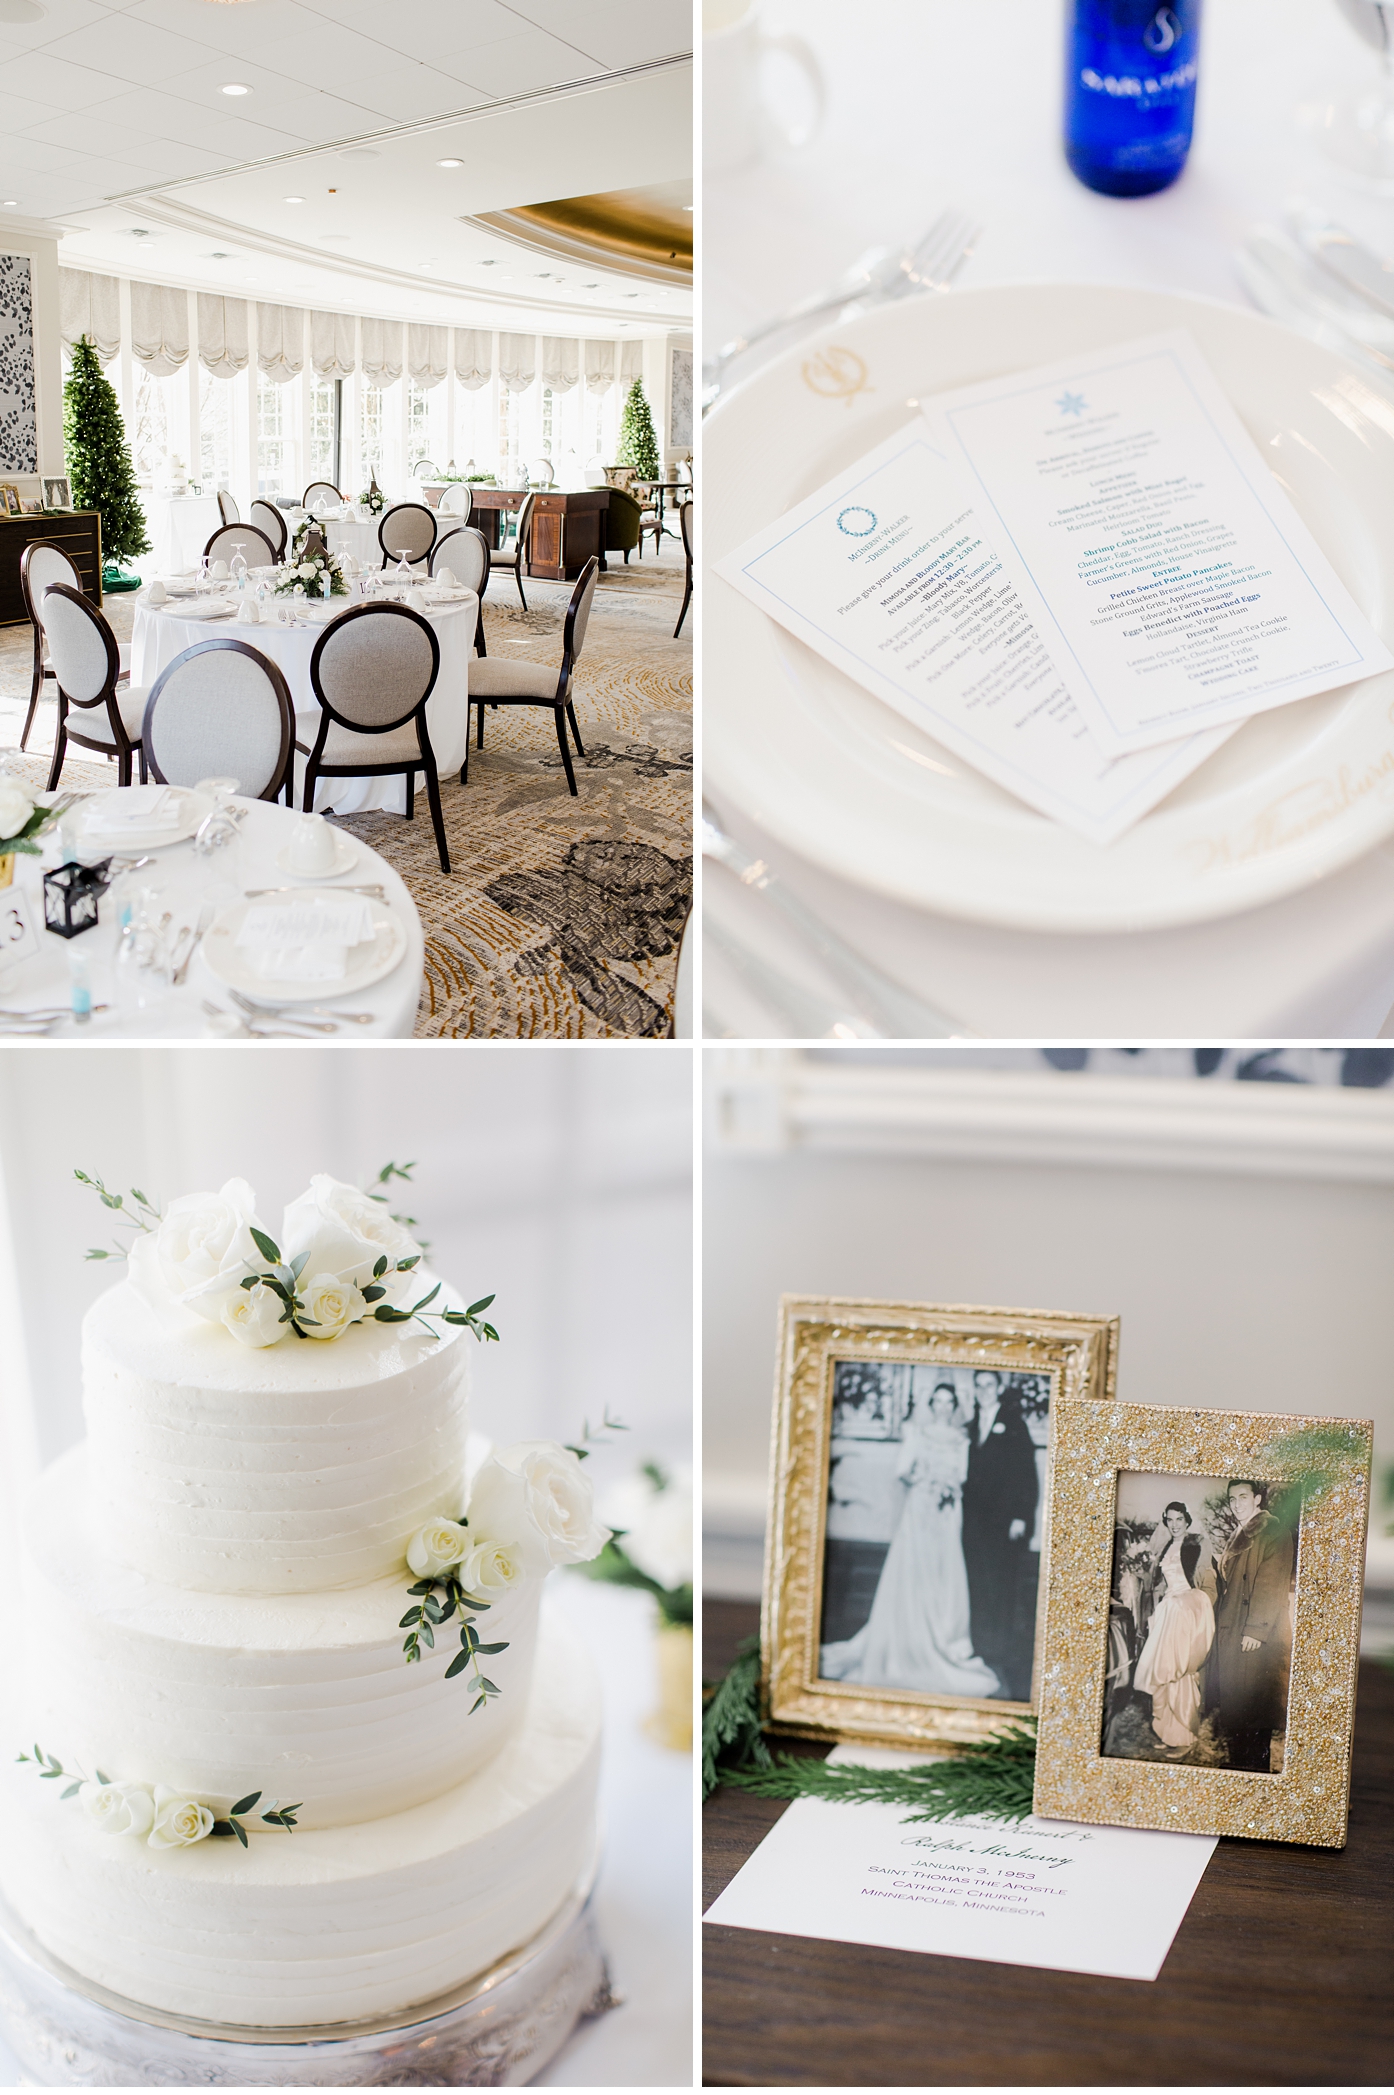 Williamsburg Inn Wedding with Gold and Emerald Details